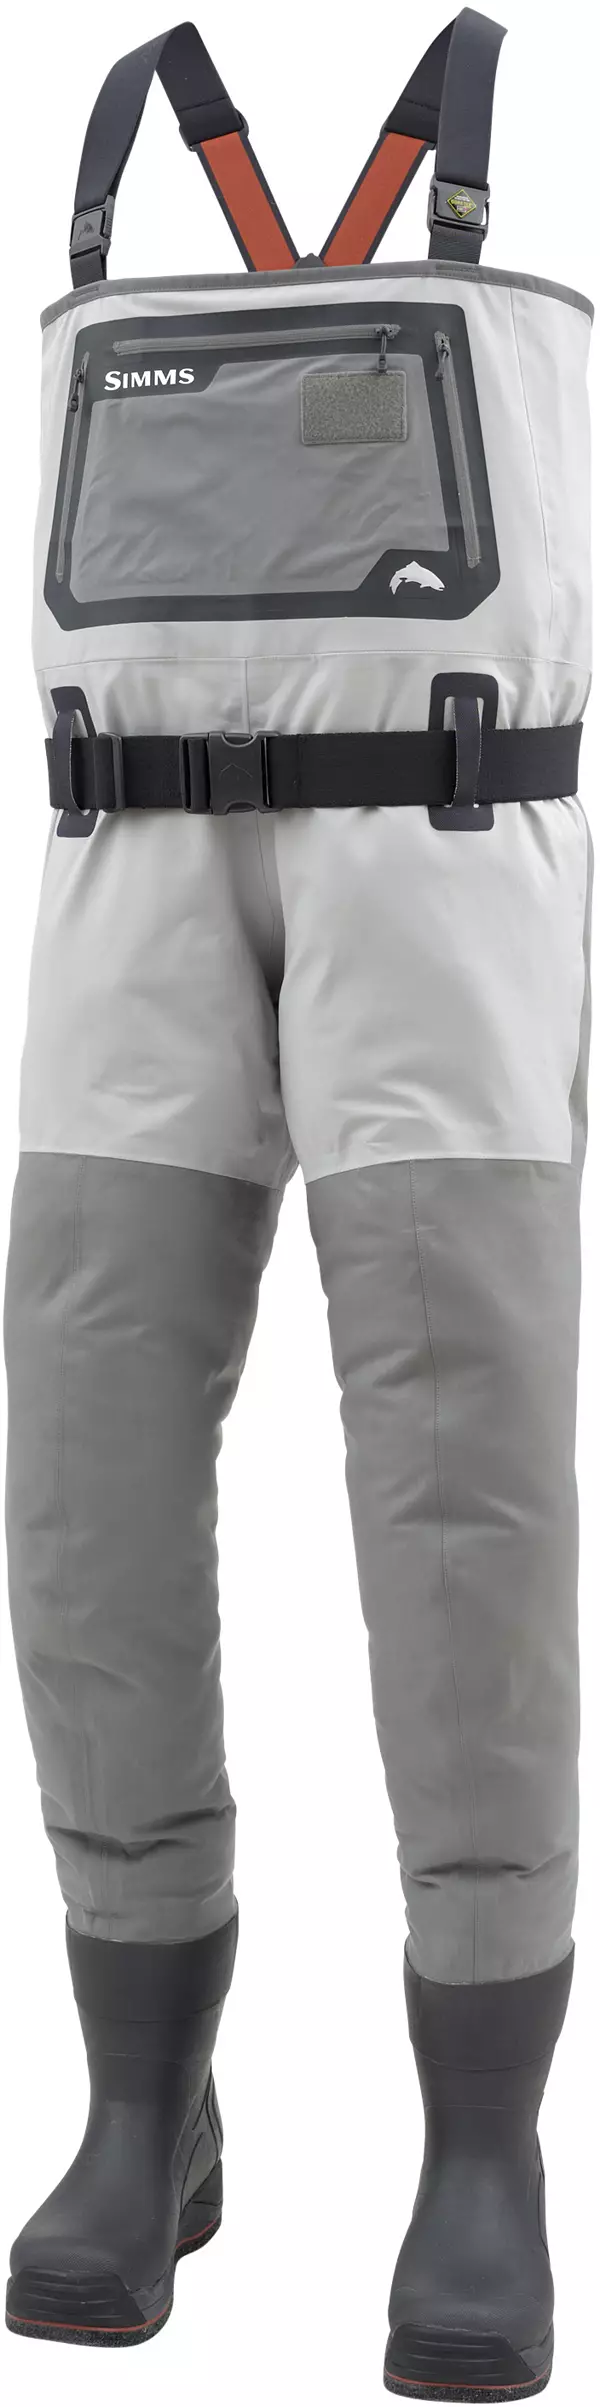 Simms G3 Guide Bootfoot Wader Sale on Select Colors